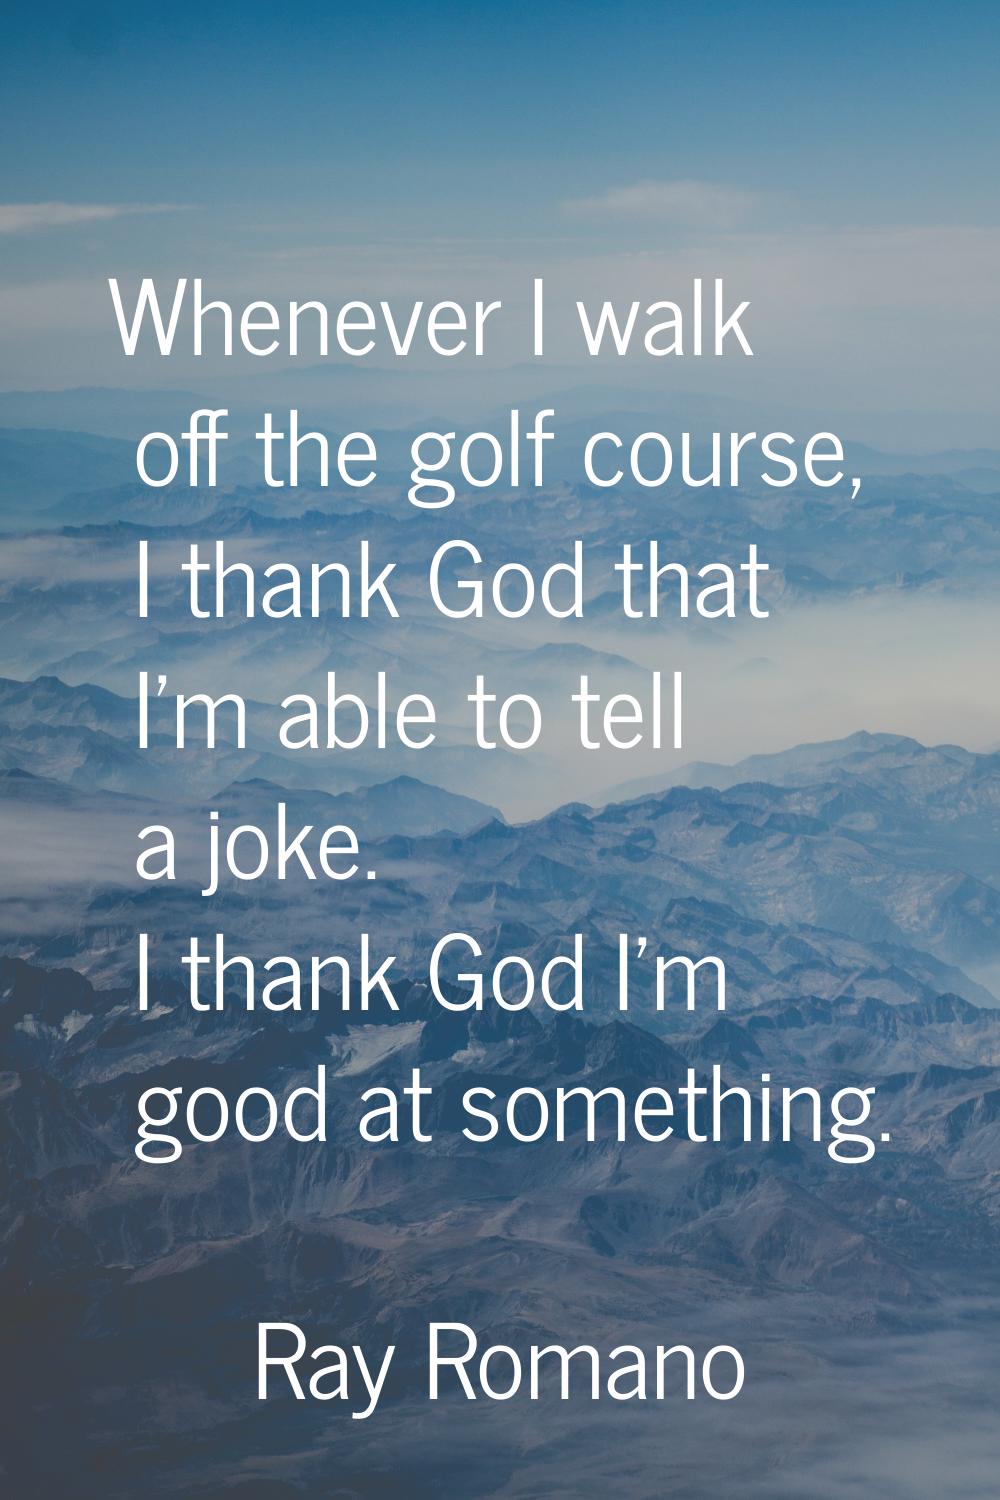 Whenever I walk off the golf course, I thank God that I'm able to tell a joke. I thank God I'm good